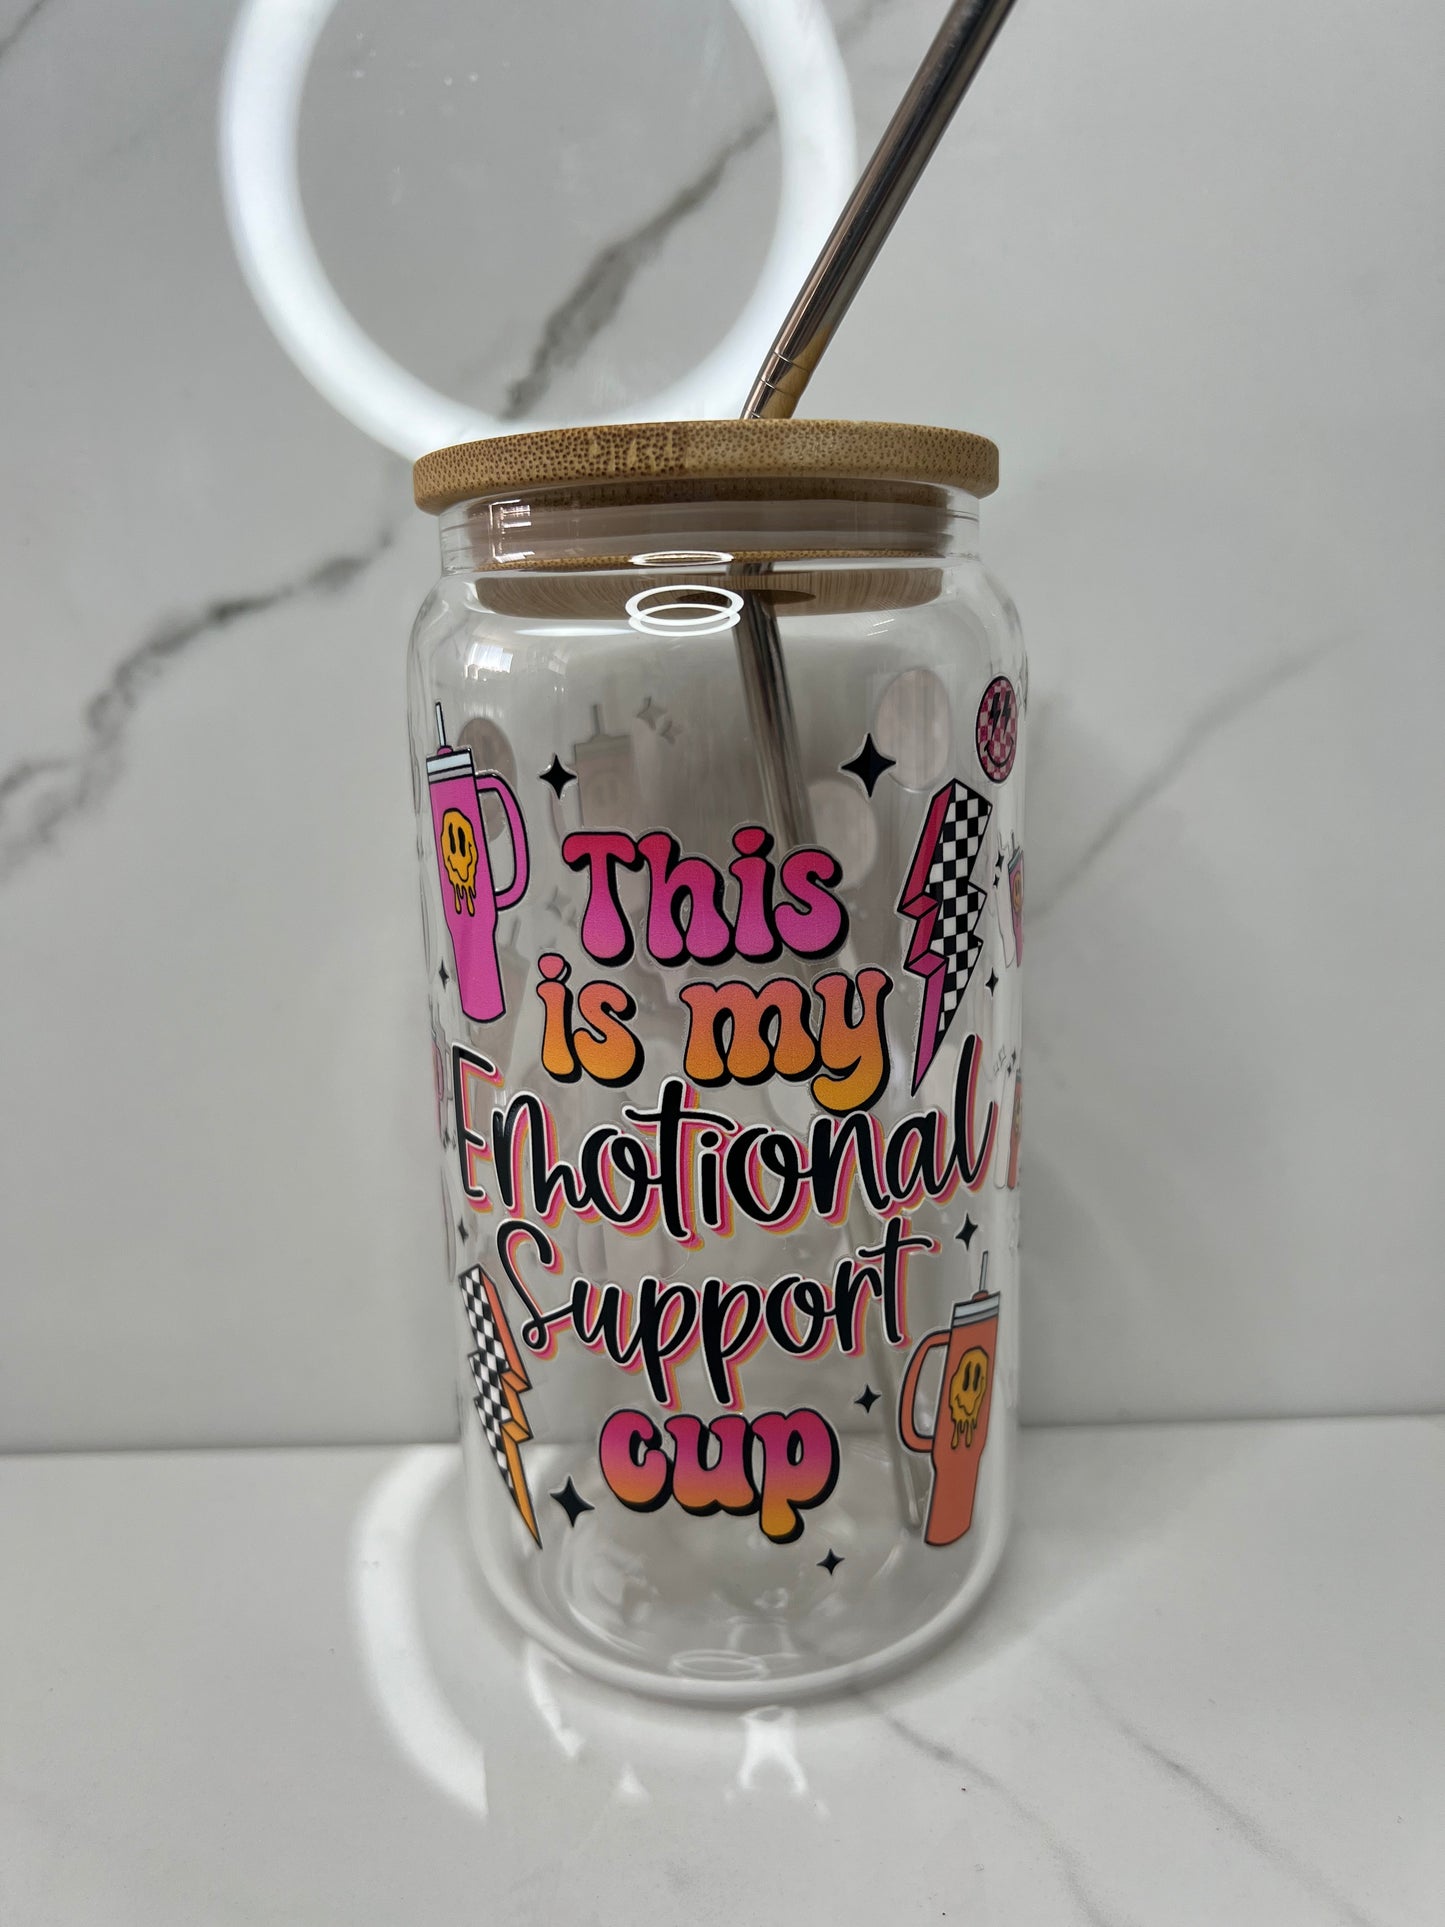 This is my emotional support cup